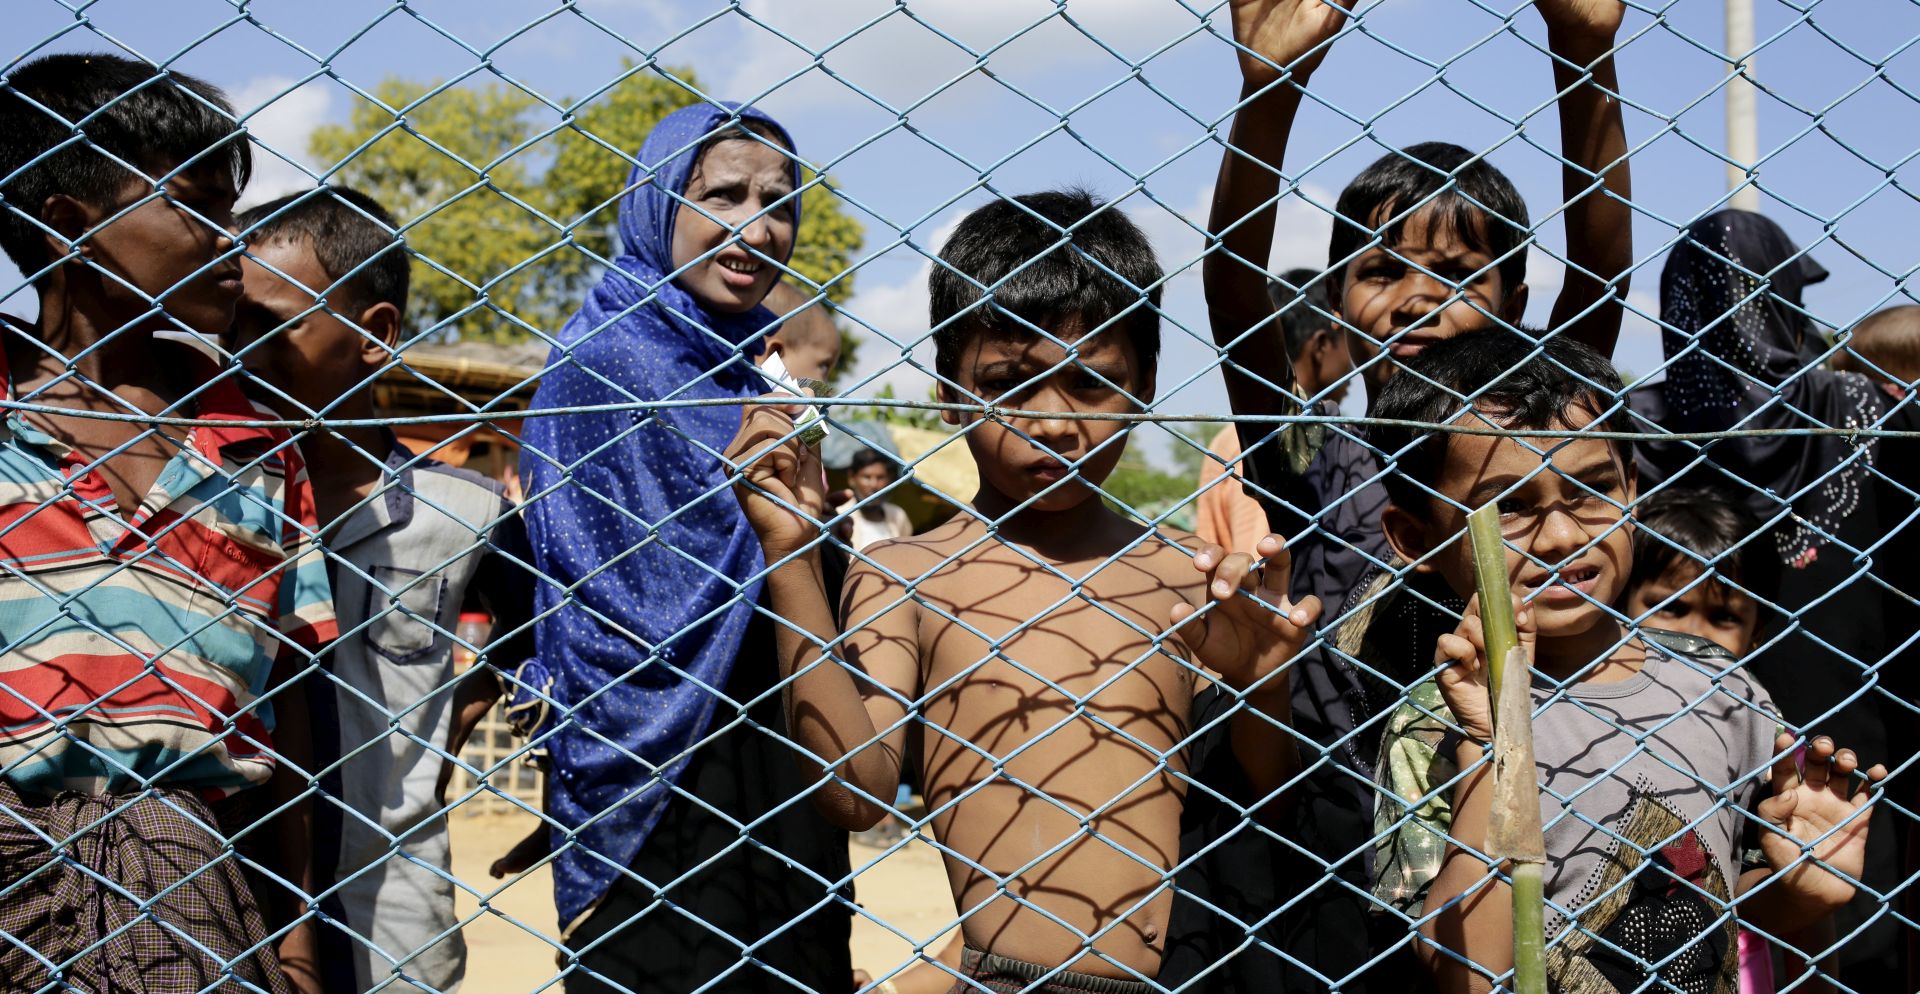 epa06338520 Rohngya refugees including children and women wait outside a fence of a health clinic at the Kutupalong, Coxabazar in Bangladesh 19 November 2017.  International politicians are currently on a fact finding tour to gather information about the Rohingya crisis, while Bangladesh hopes for international help and support for the refugees.  EPA/ABIR ABDULLAH